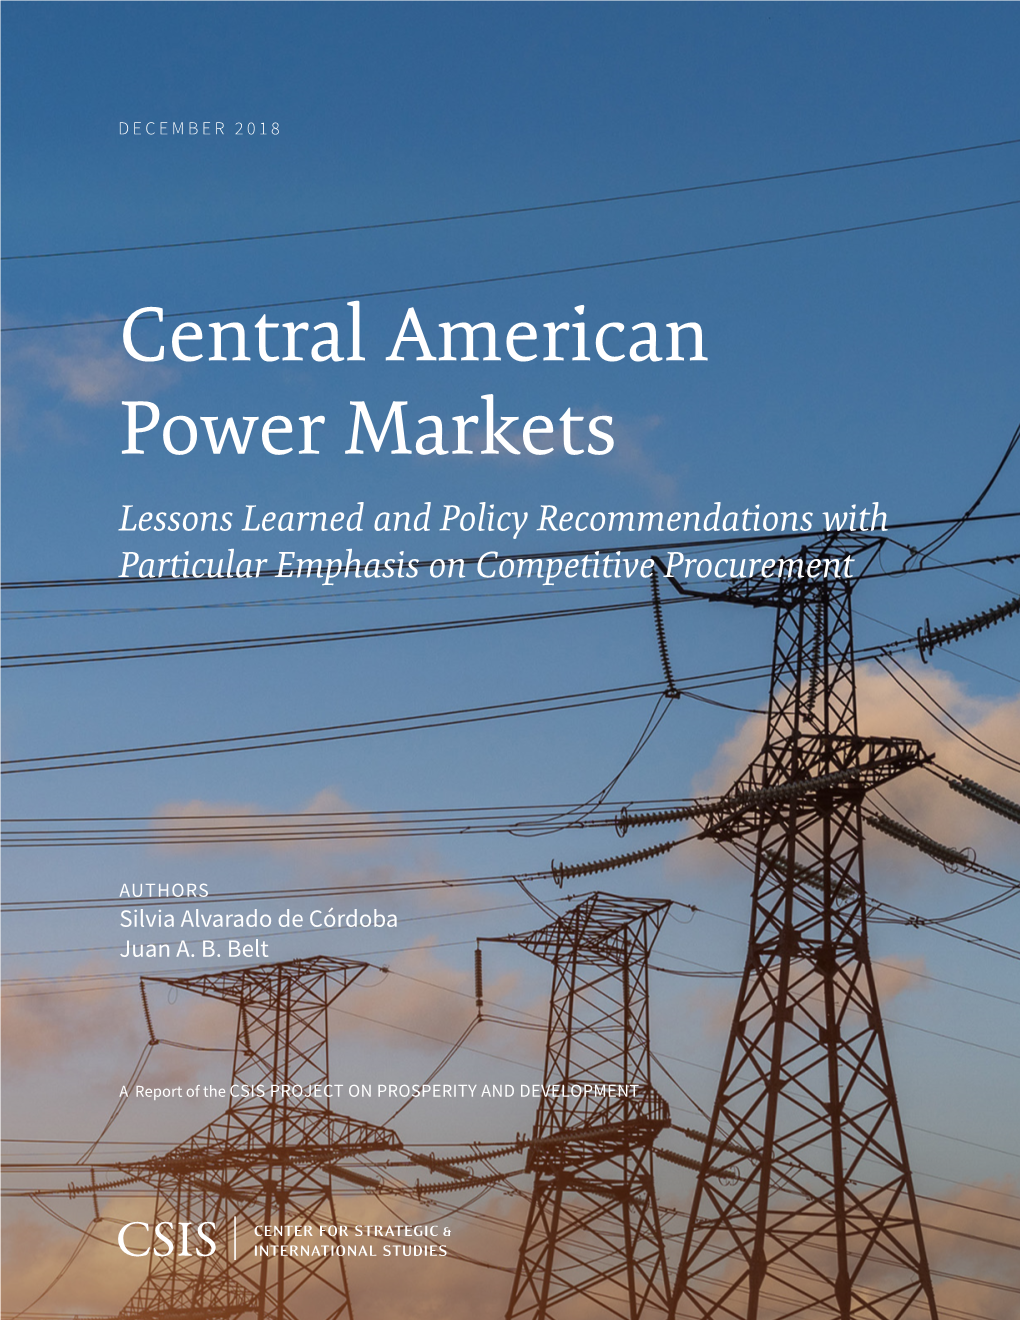 Central American Power Markets Lessons Learned and Policy Recommendations with Particular Emphasis on Competitive Procurement